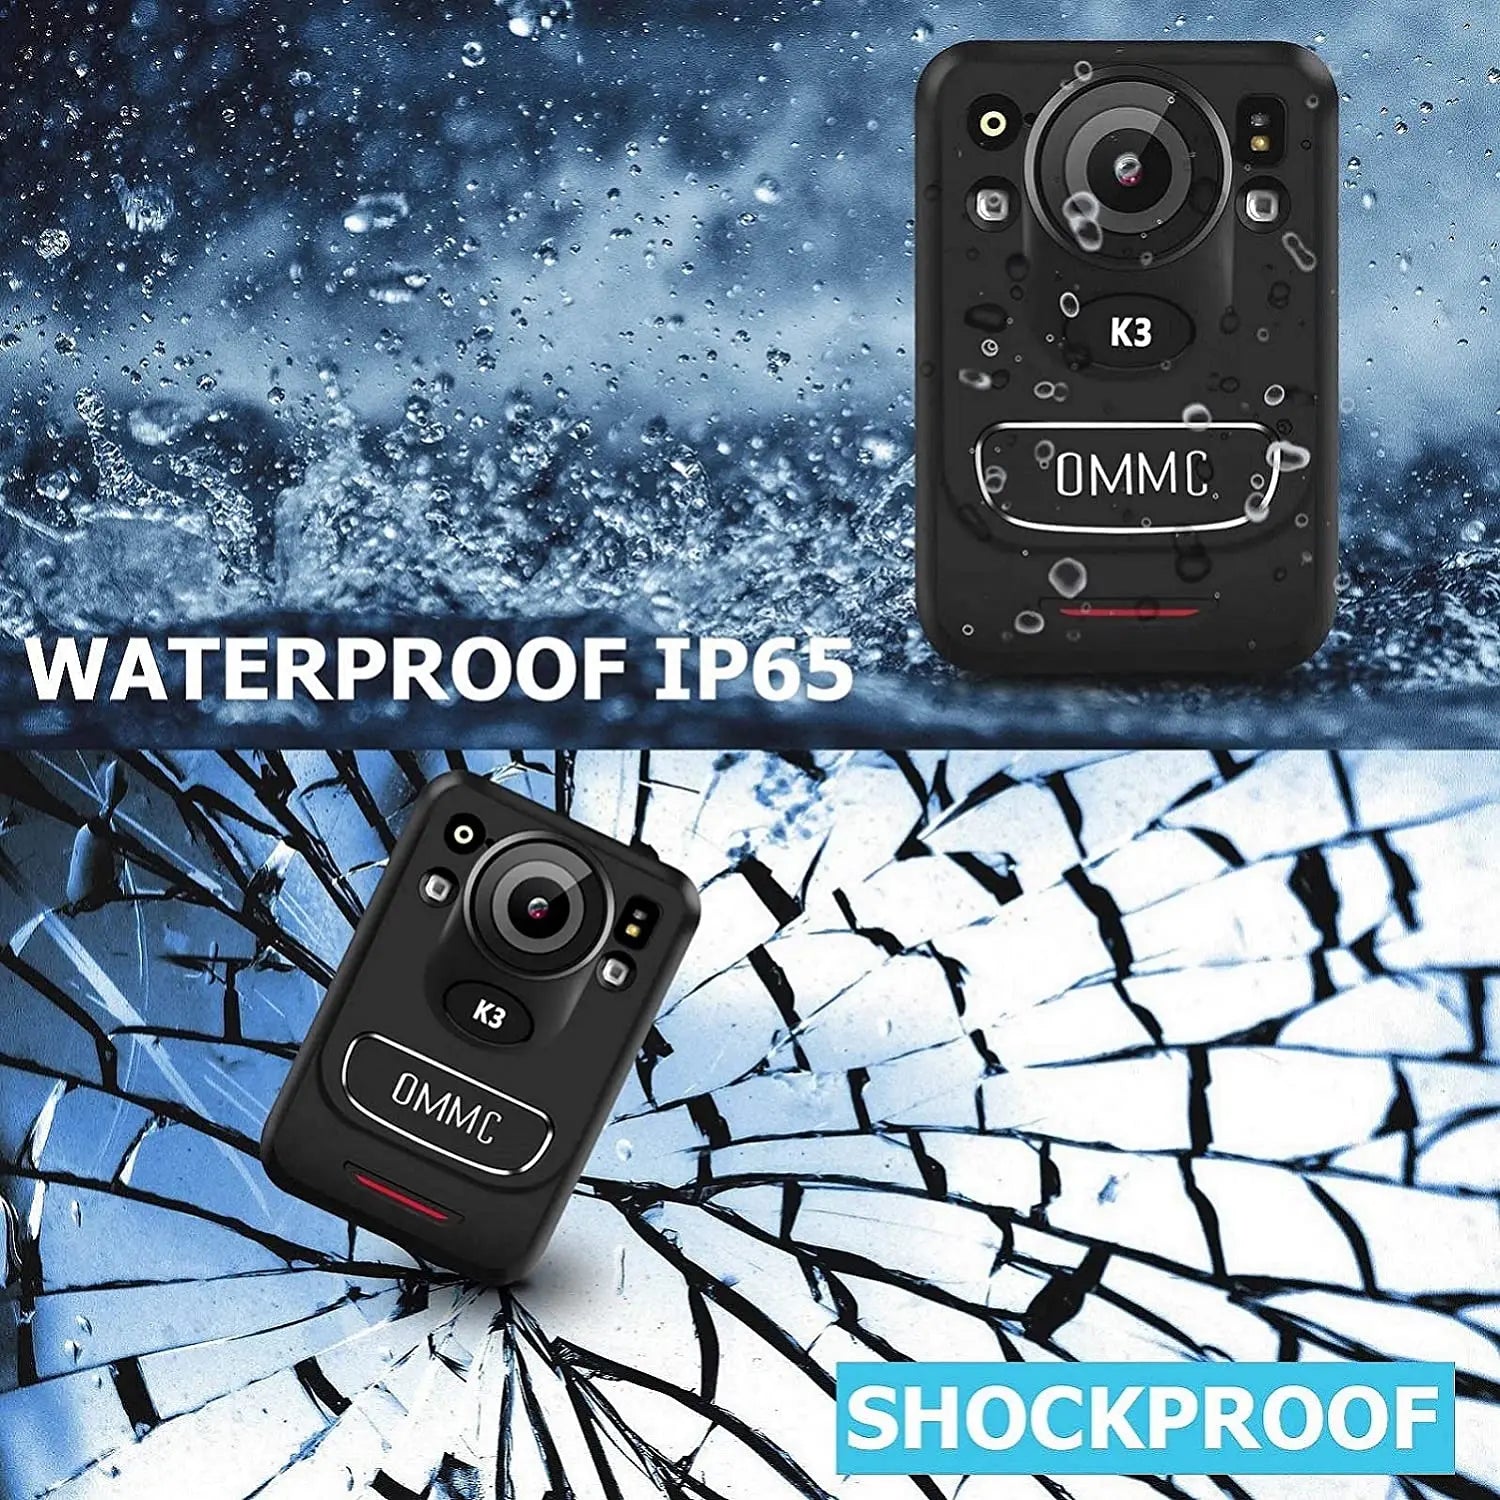 CammPro C3 Video Recorder 1296P FHD IR Police 128GB police video body worn camera with Security 140 Degree Lens